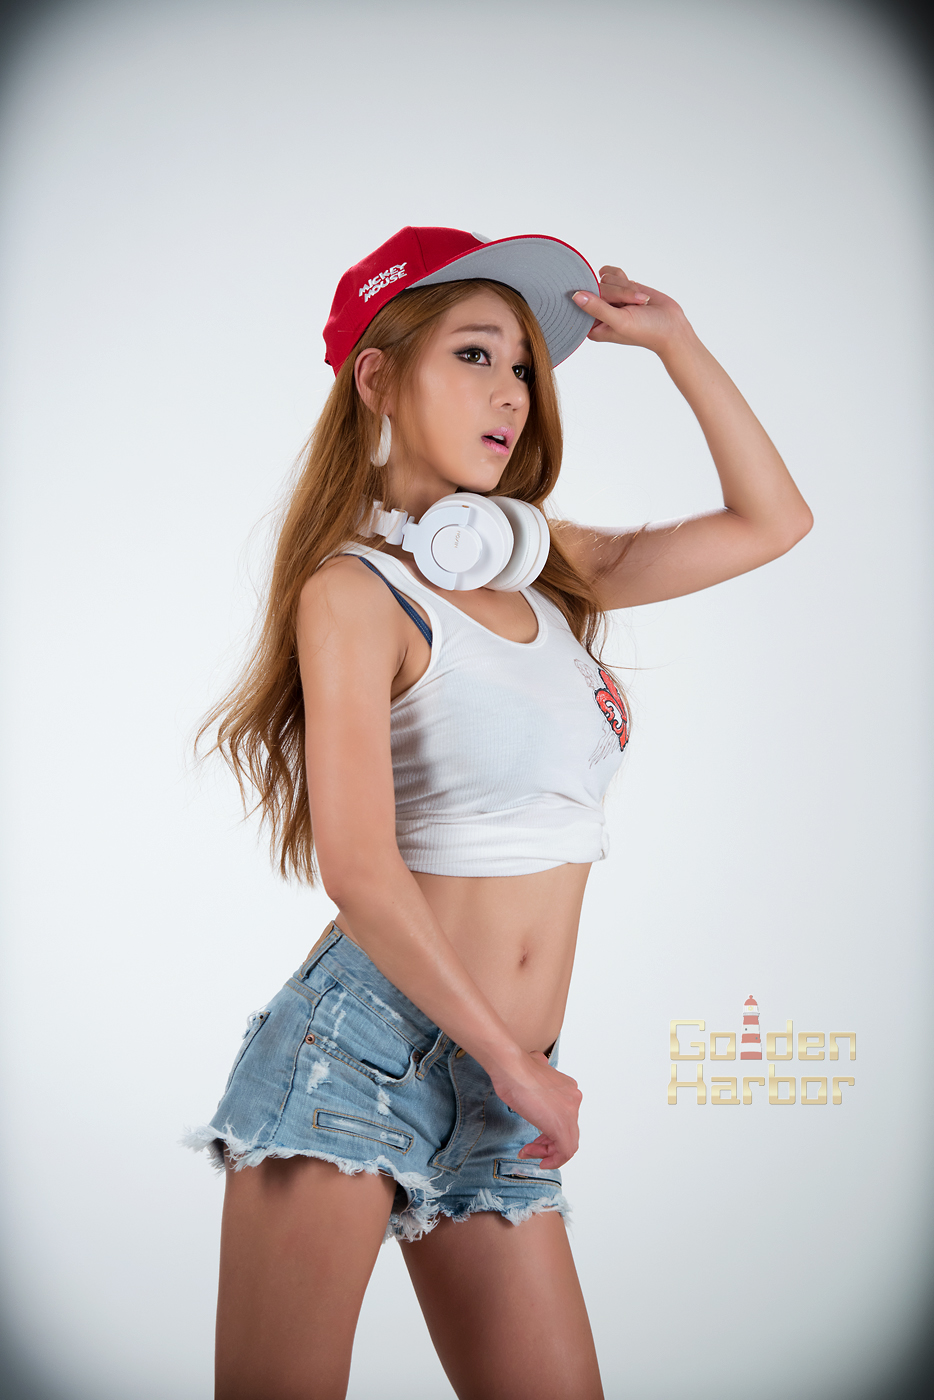 Park Si Hyun In A White Crop Top And Sexy Jean Shorts